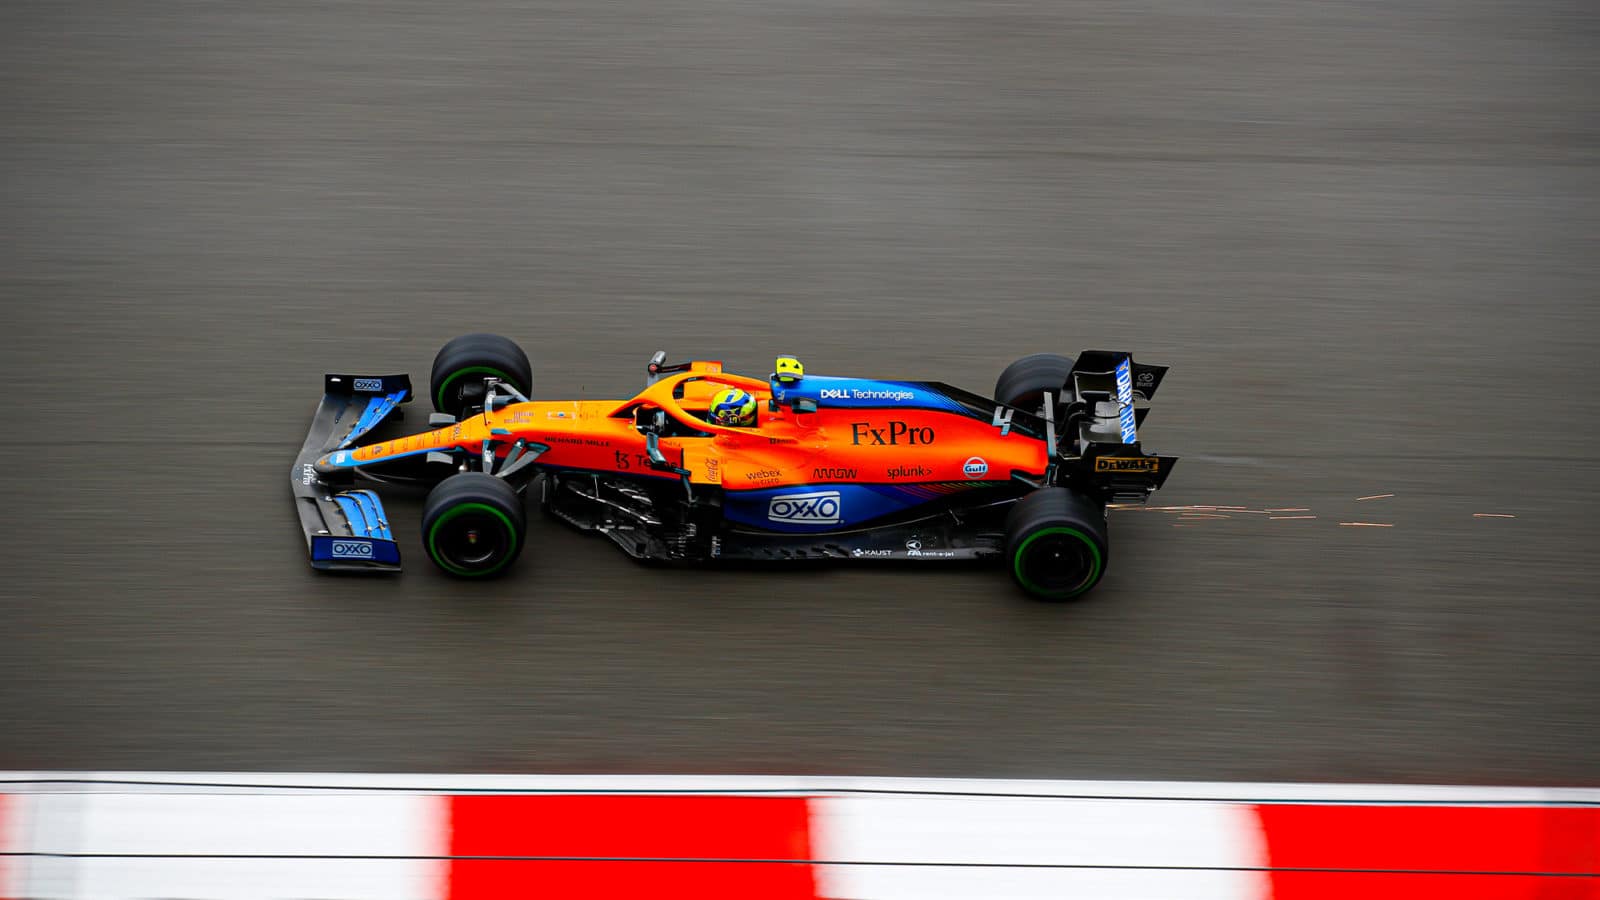 Lando Norris in qualifying for the 2021 Russian GP